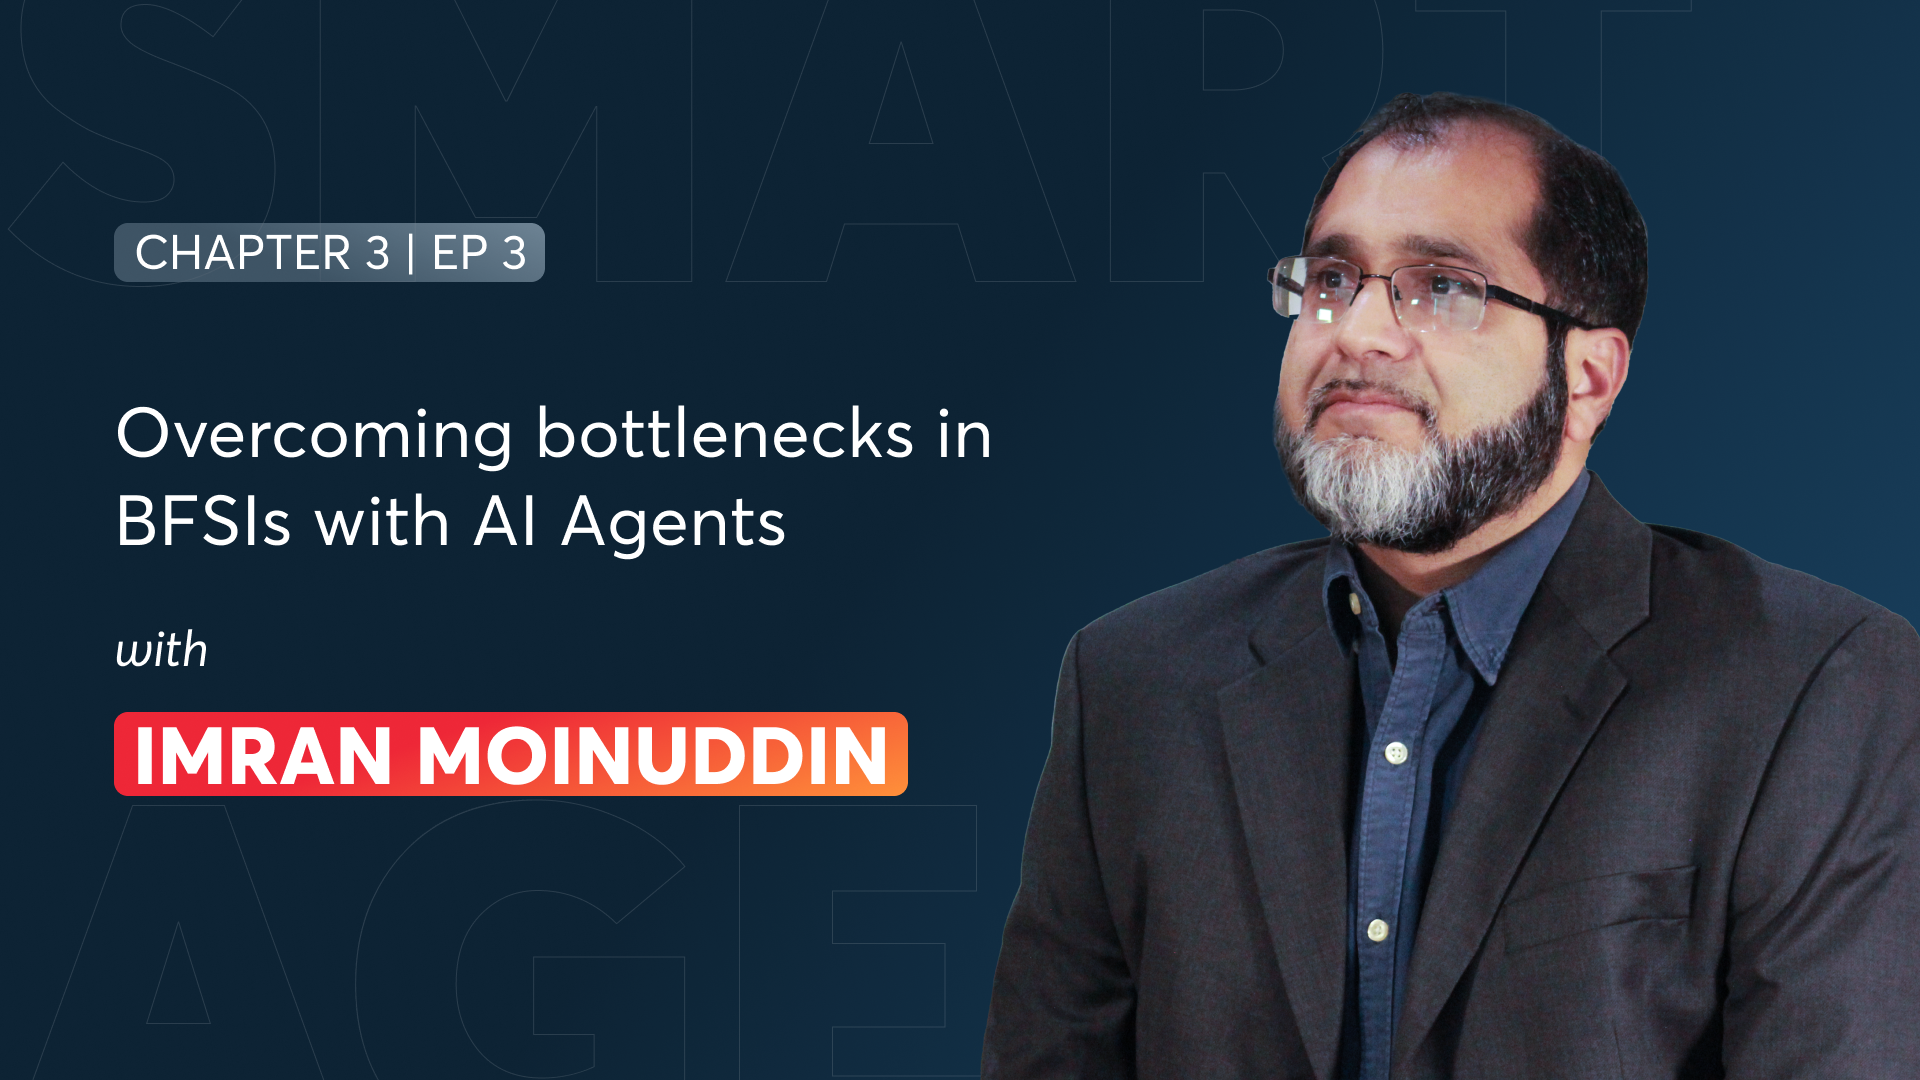 Data and AI Series - Part 3: EP 3: Overcoming bottlenecks in BFSIs with AI Agents